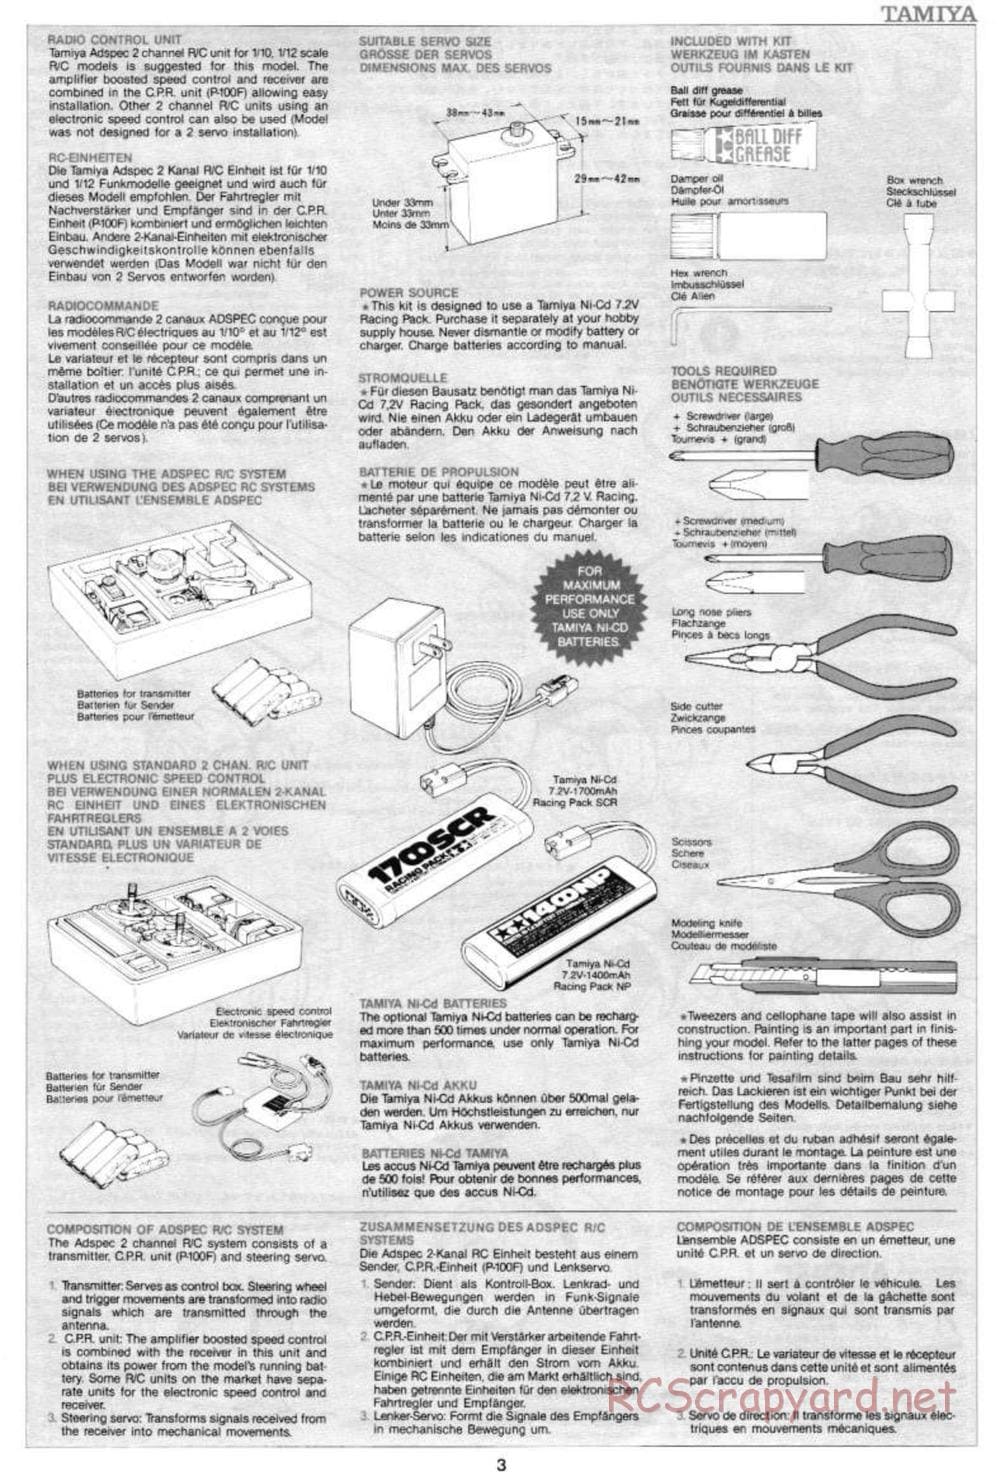 Tamiya - Mercedes-Benz C11 - Group-C Chassis - Manual - Page 3